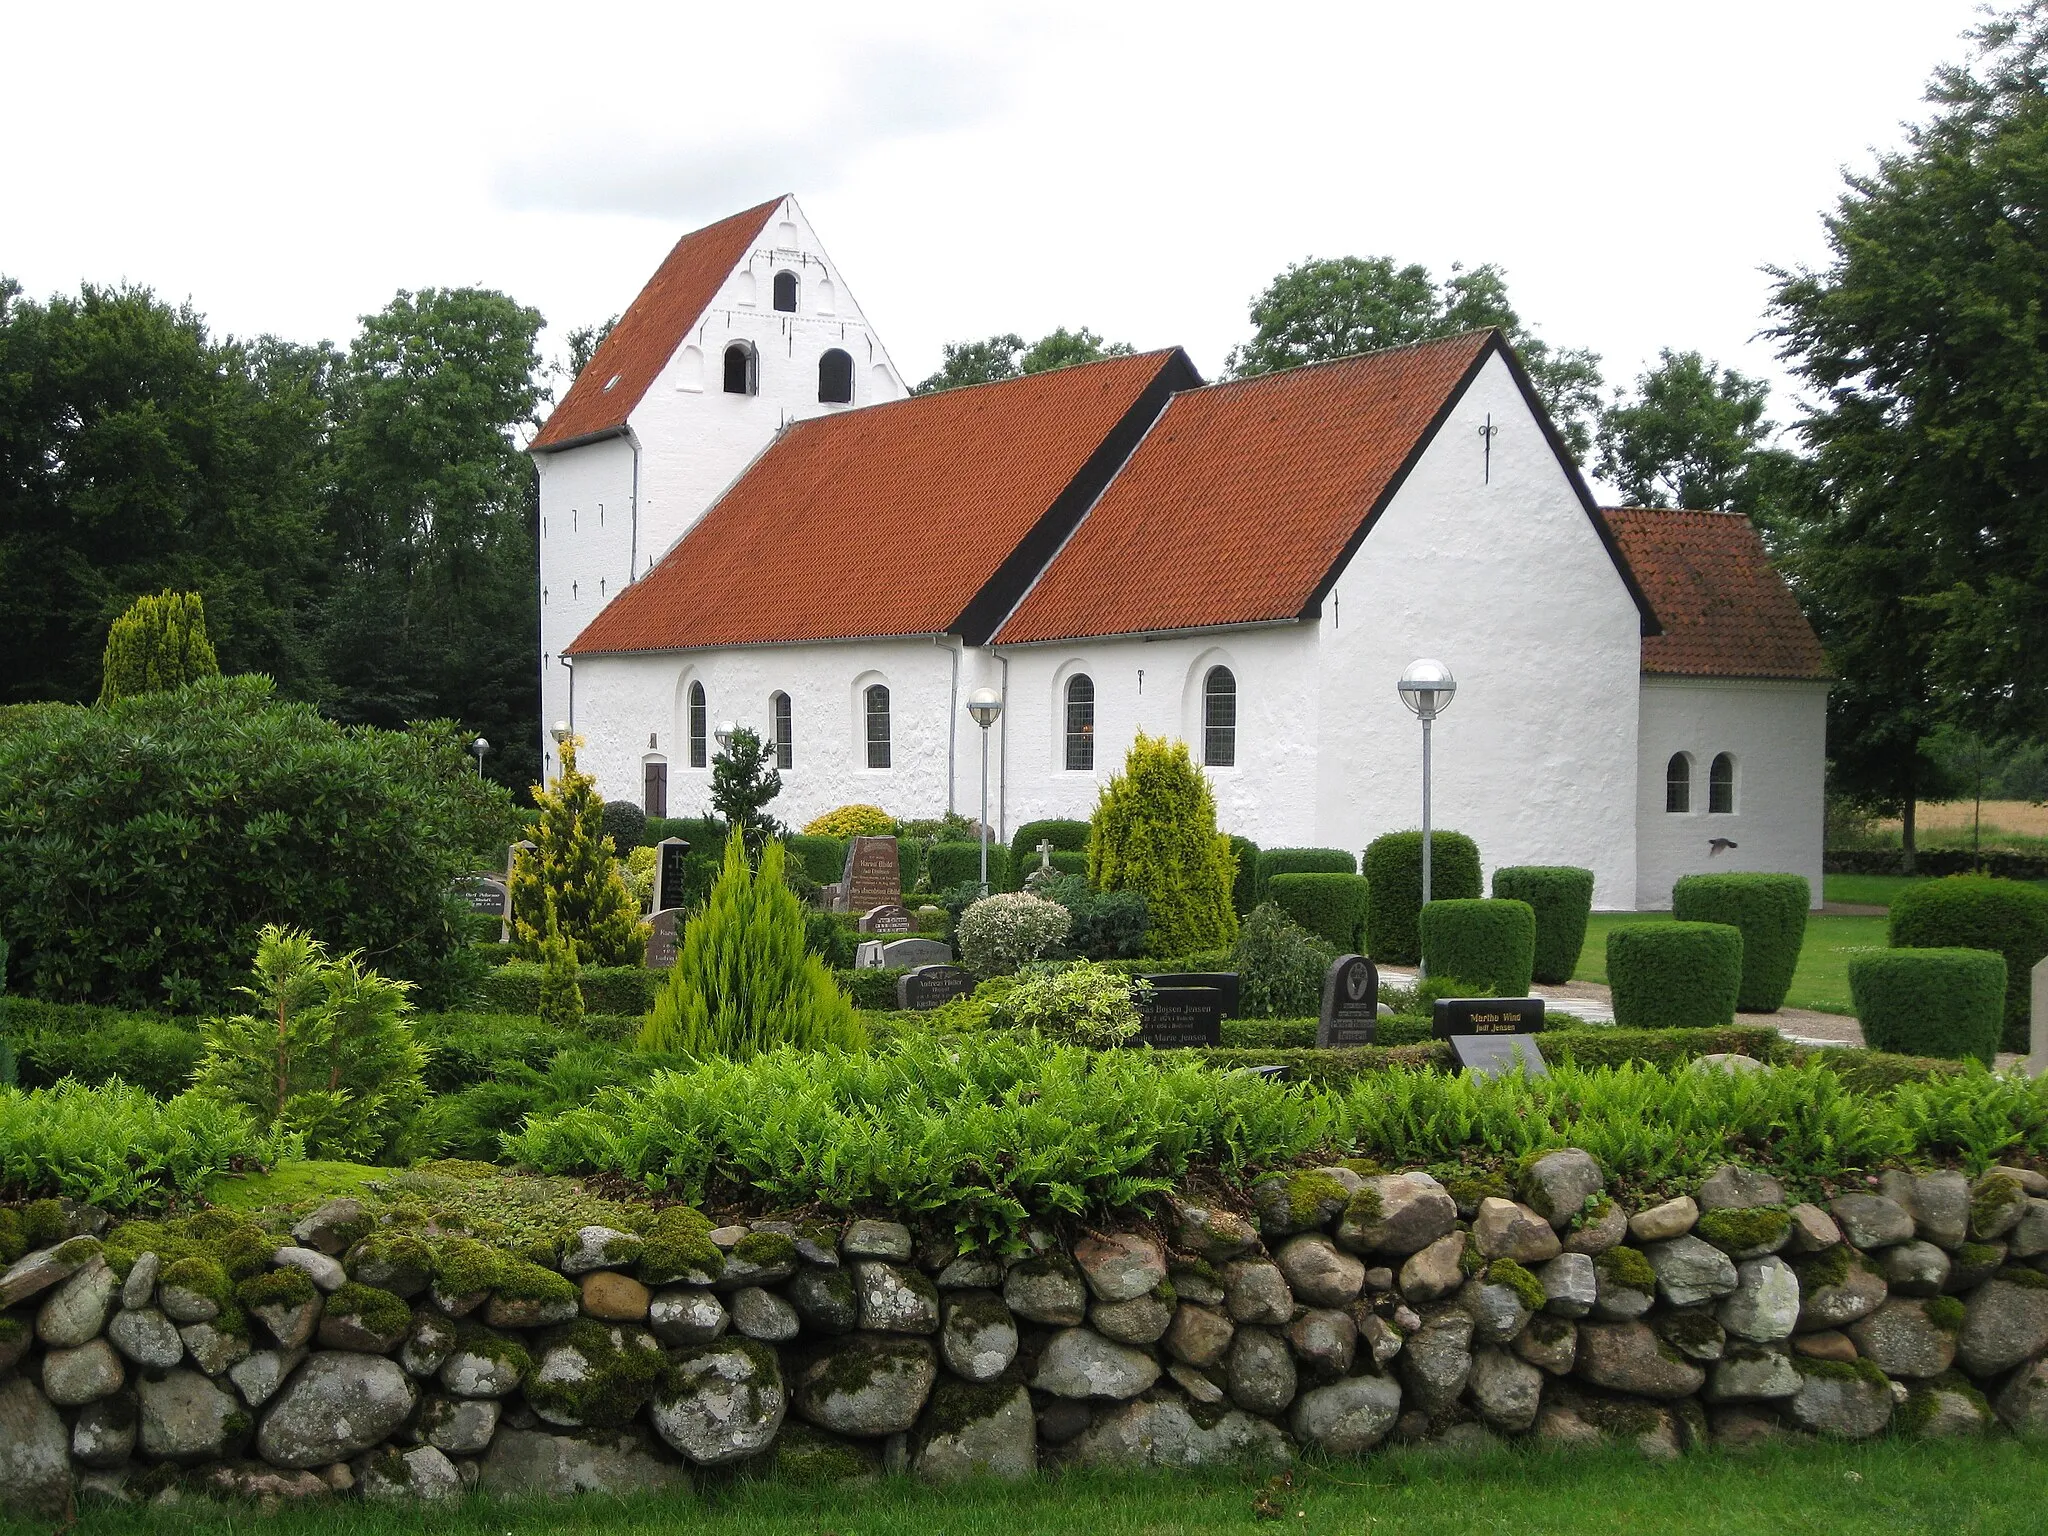 Photo showing: The church "Hellevad Kirke" in the village "Hellevad". The village is located in Southern Jutland in south Denmark.